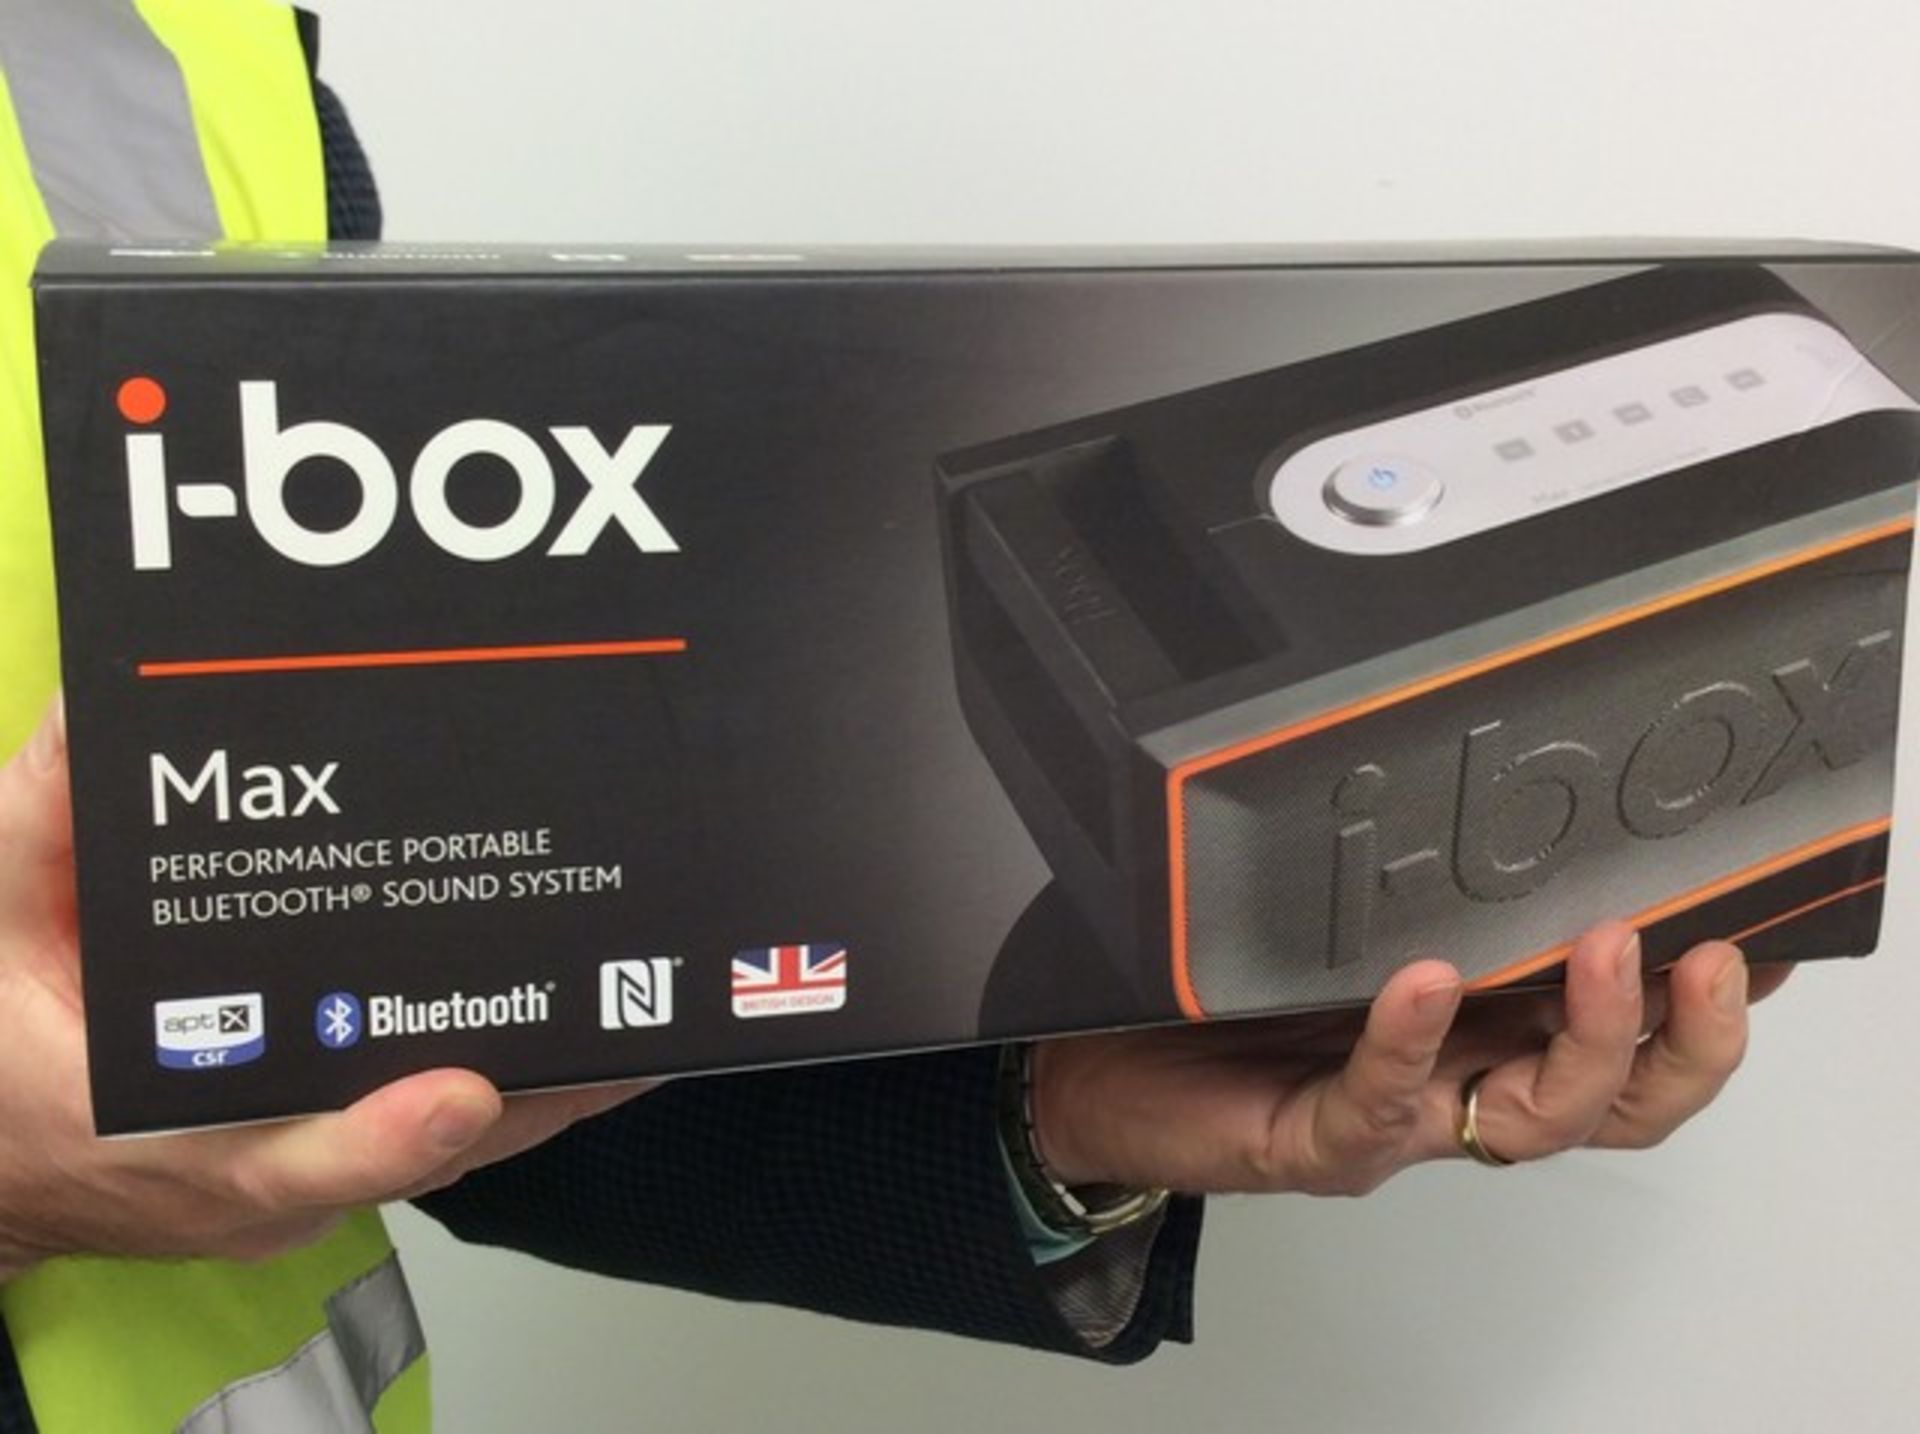 V Brand New (RRP £148.99) i-Box Max Performance Portable Bluetooth Sound System With Touch Sensitive - Image 3 of 3